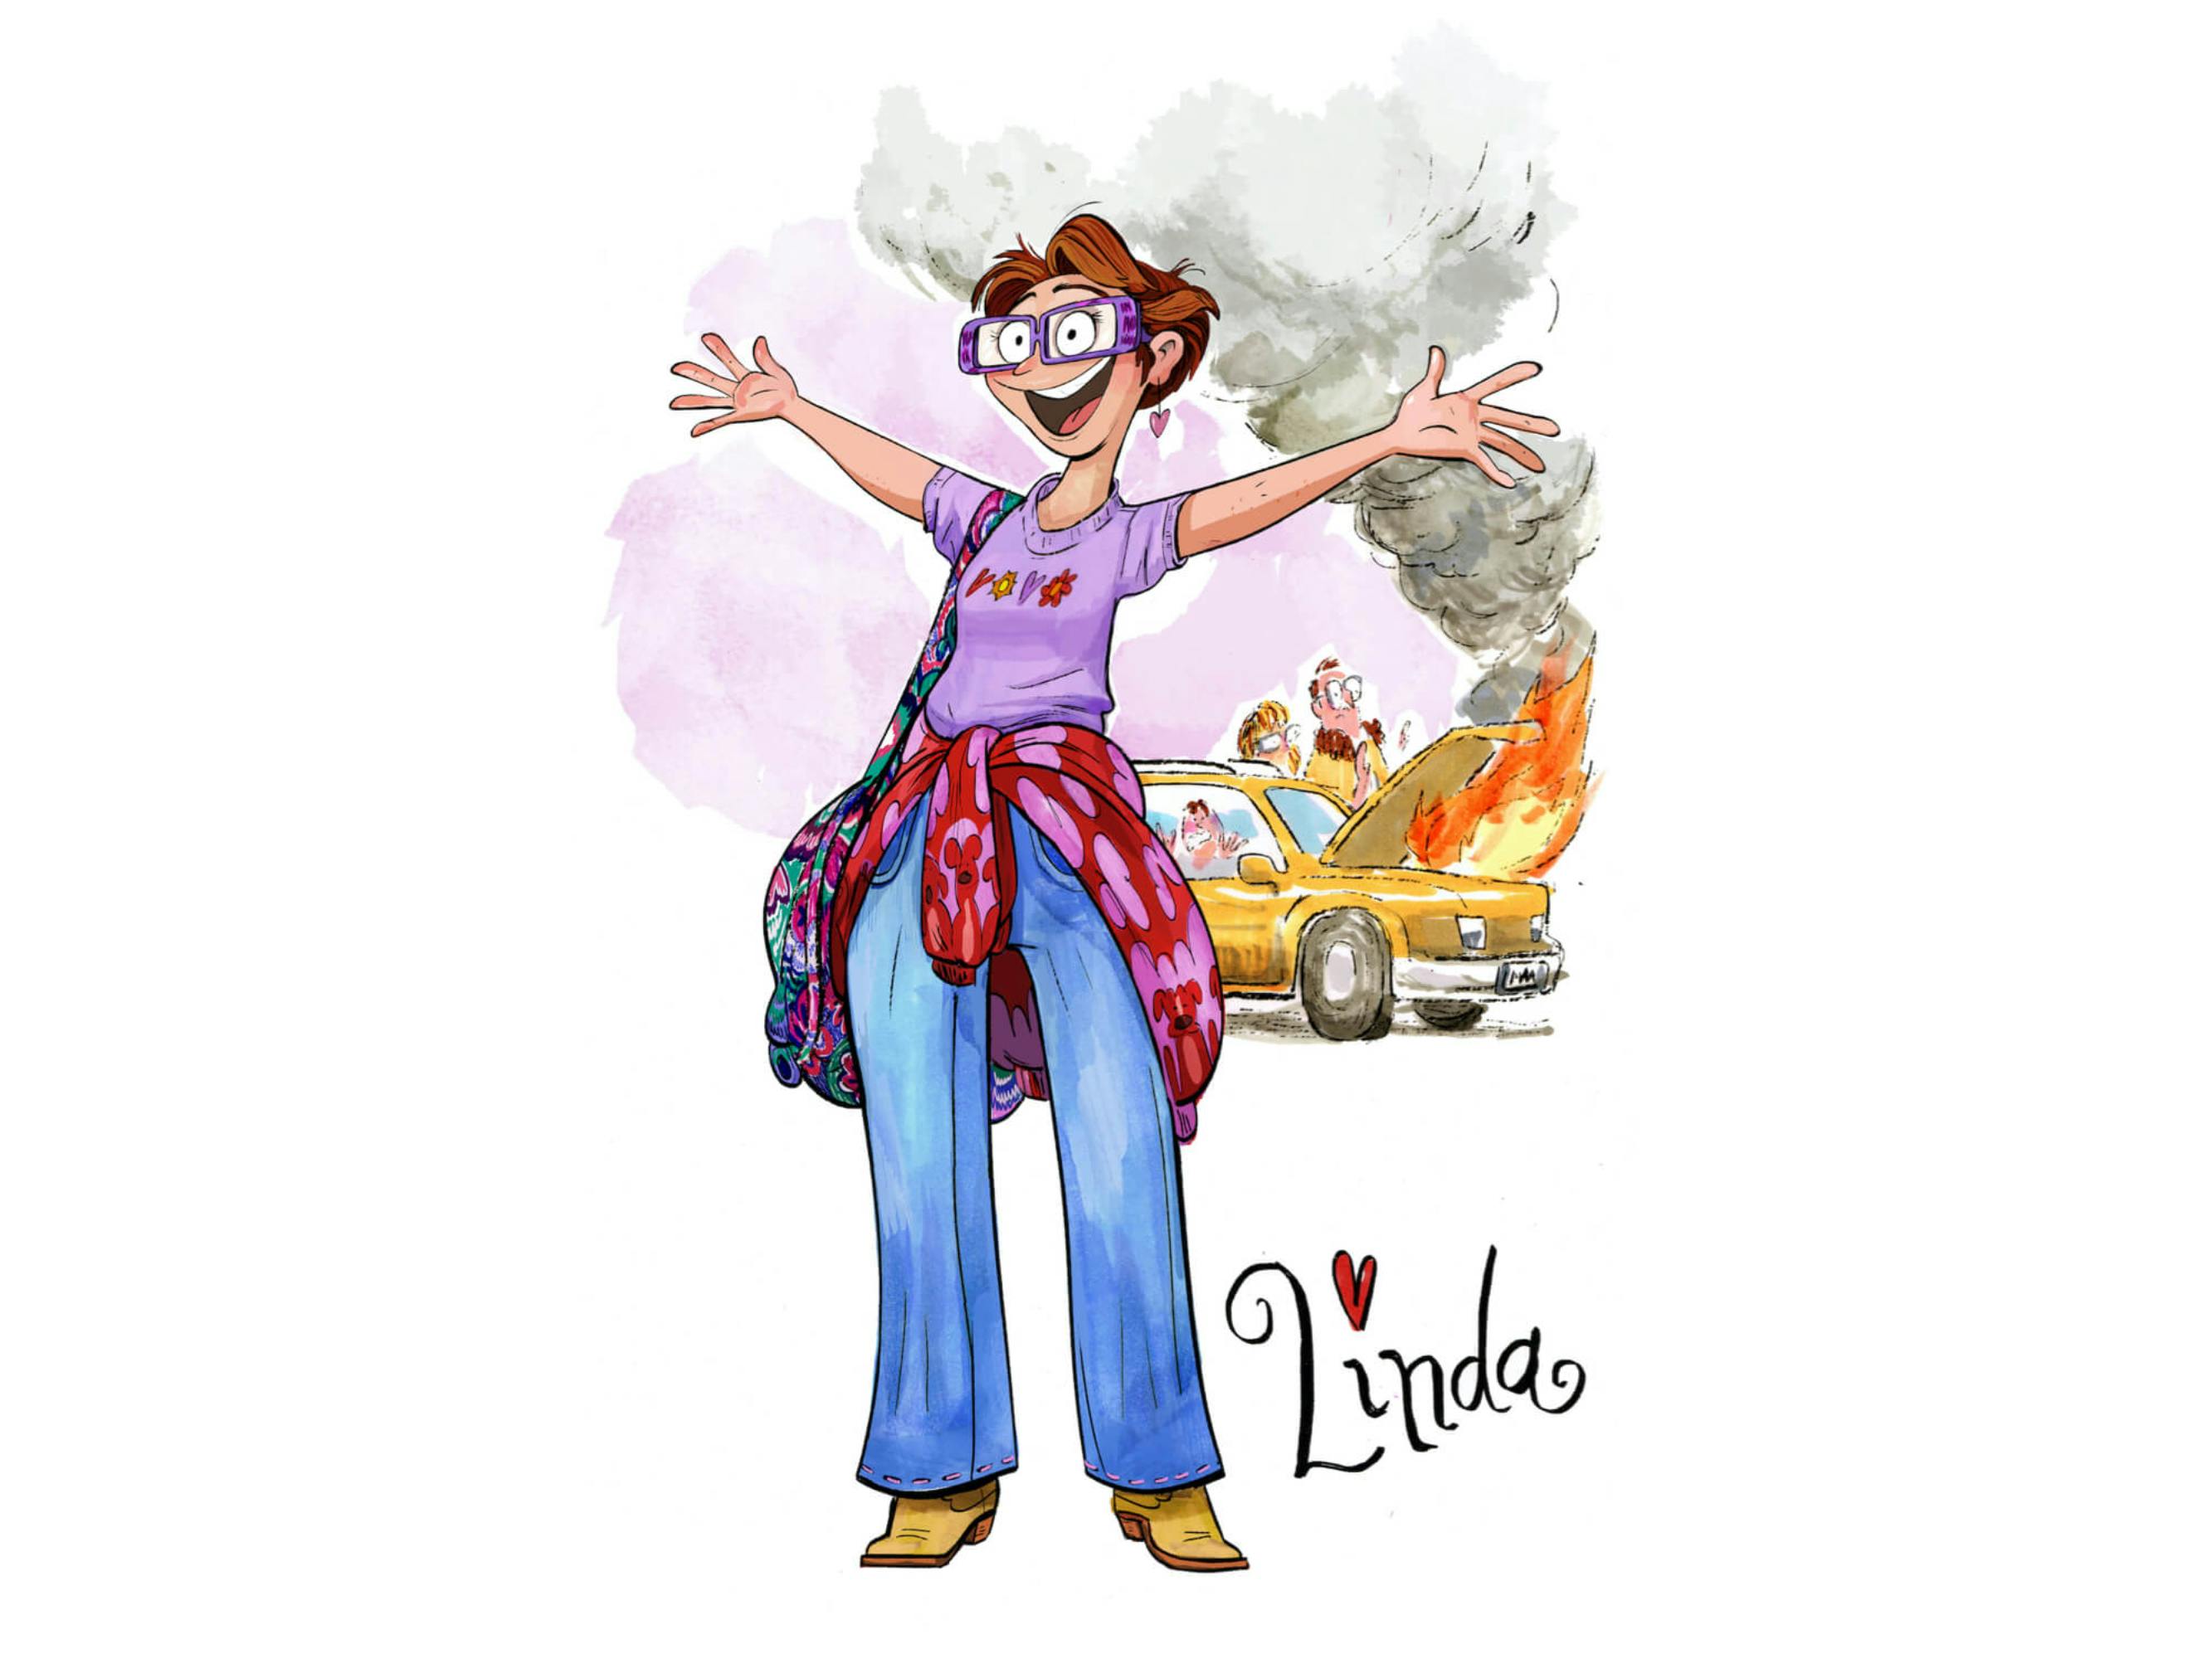 Linda wears jeans, yellow boots, purple t-shirt, and pink sweater tied around her waist. Her eyes are magnified by purple glasses and she looks happy, despite the car’s hood erupting in fire behind her.